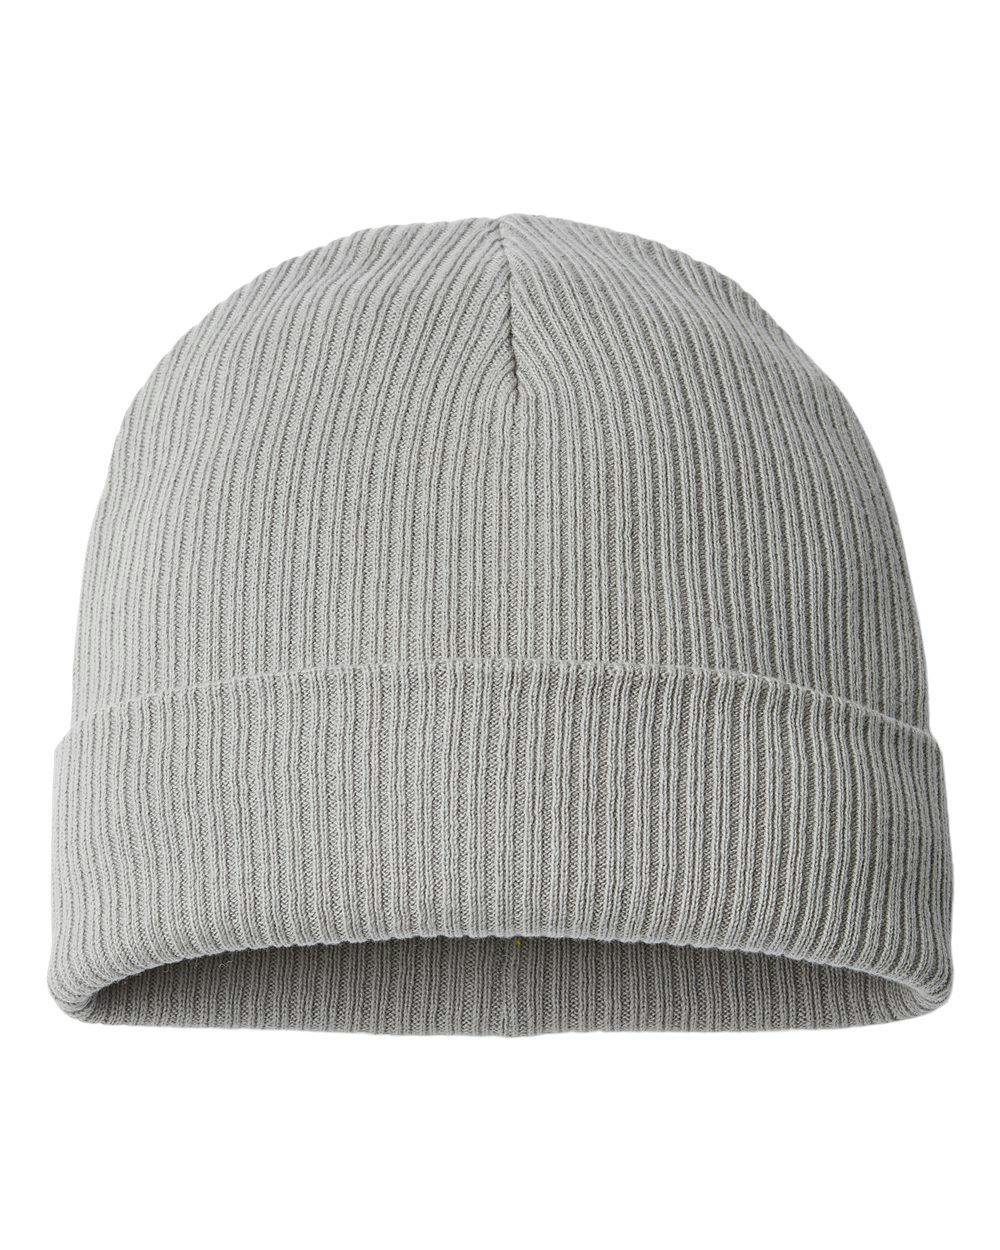 Image for Sustainable Cuffed Beanie - NELSON